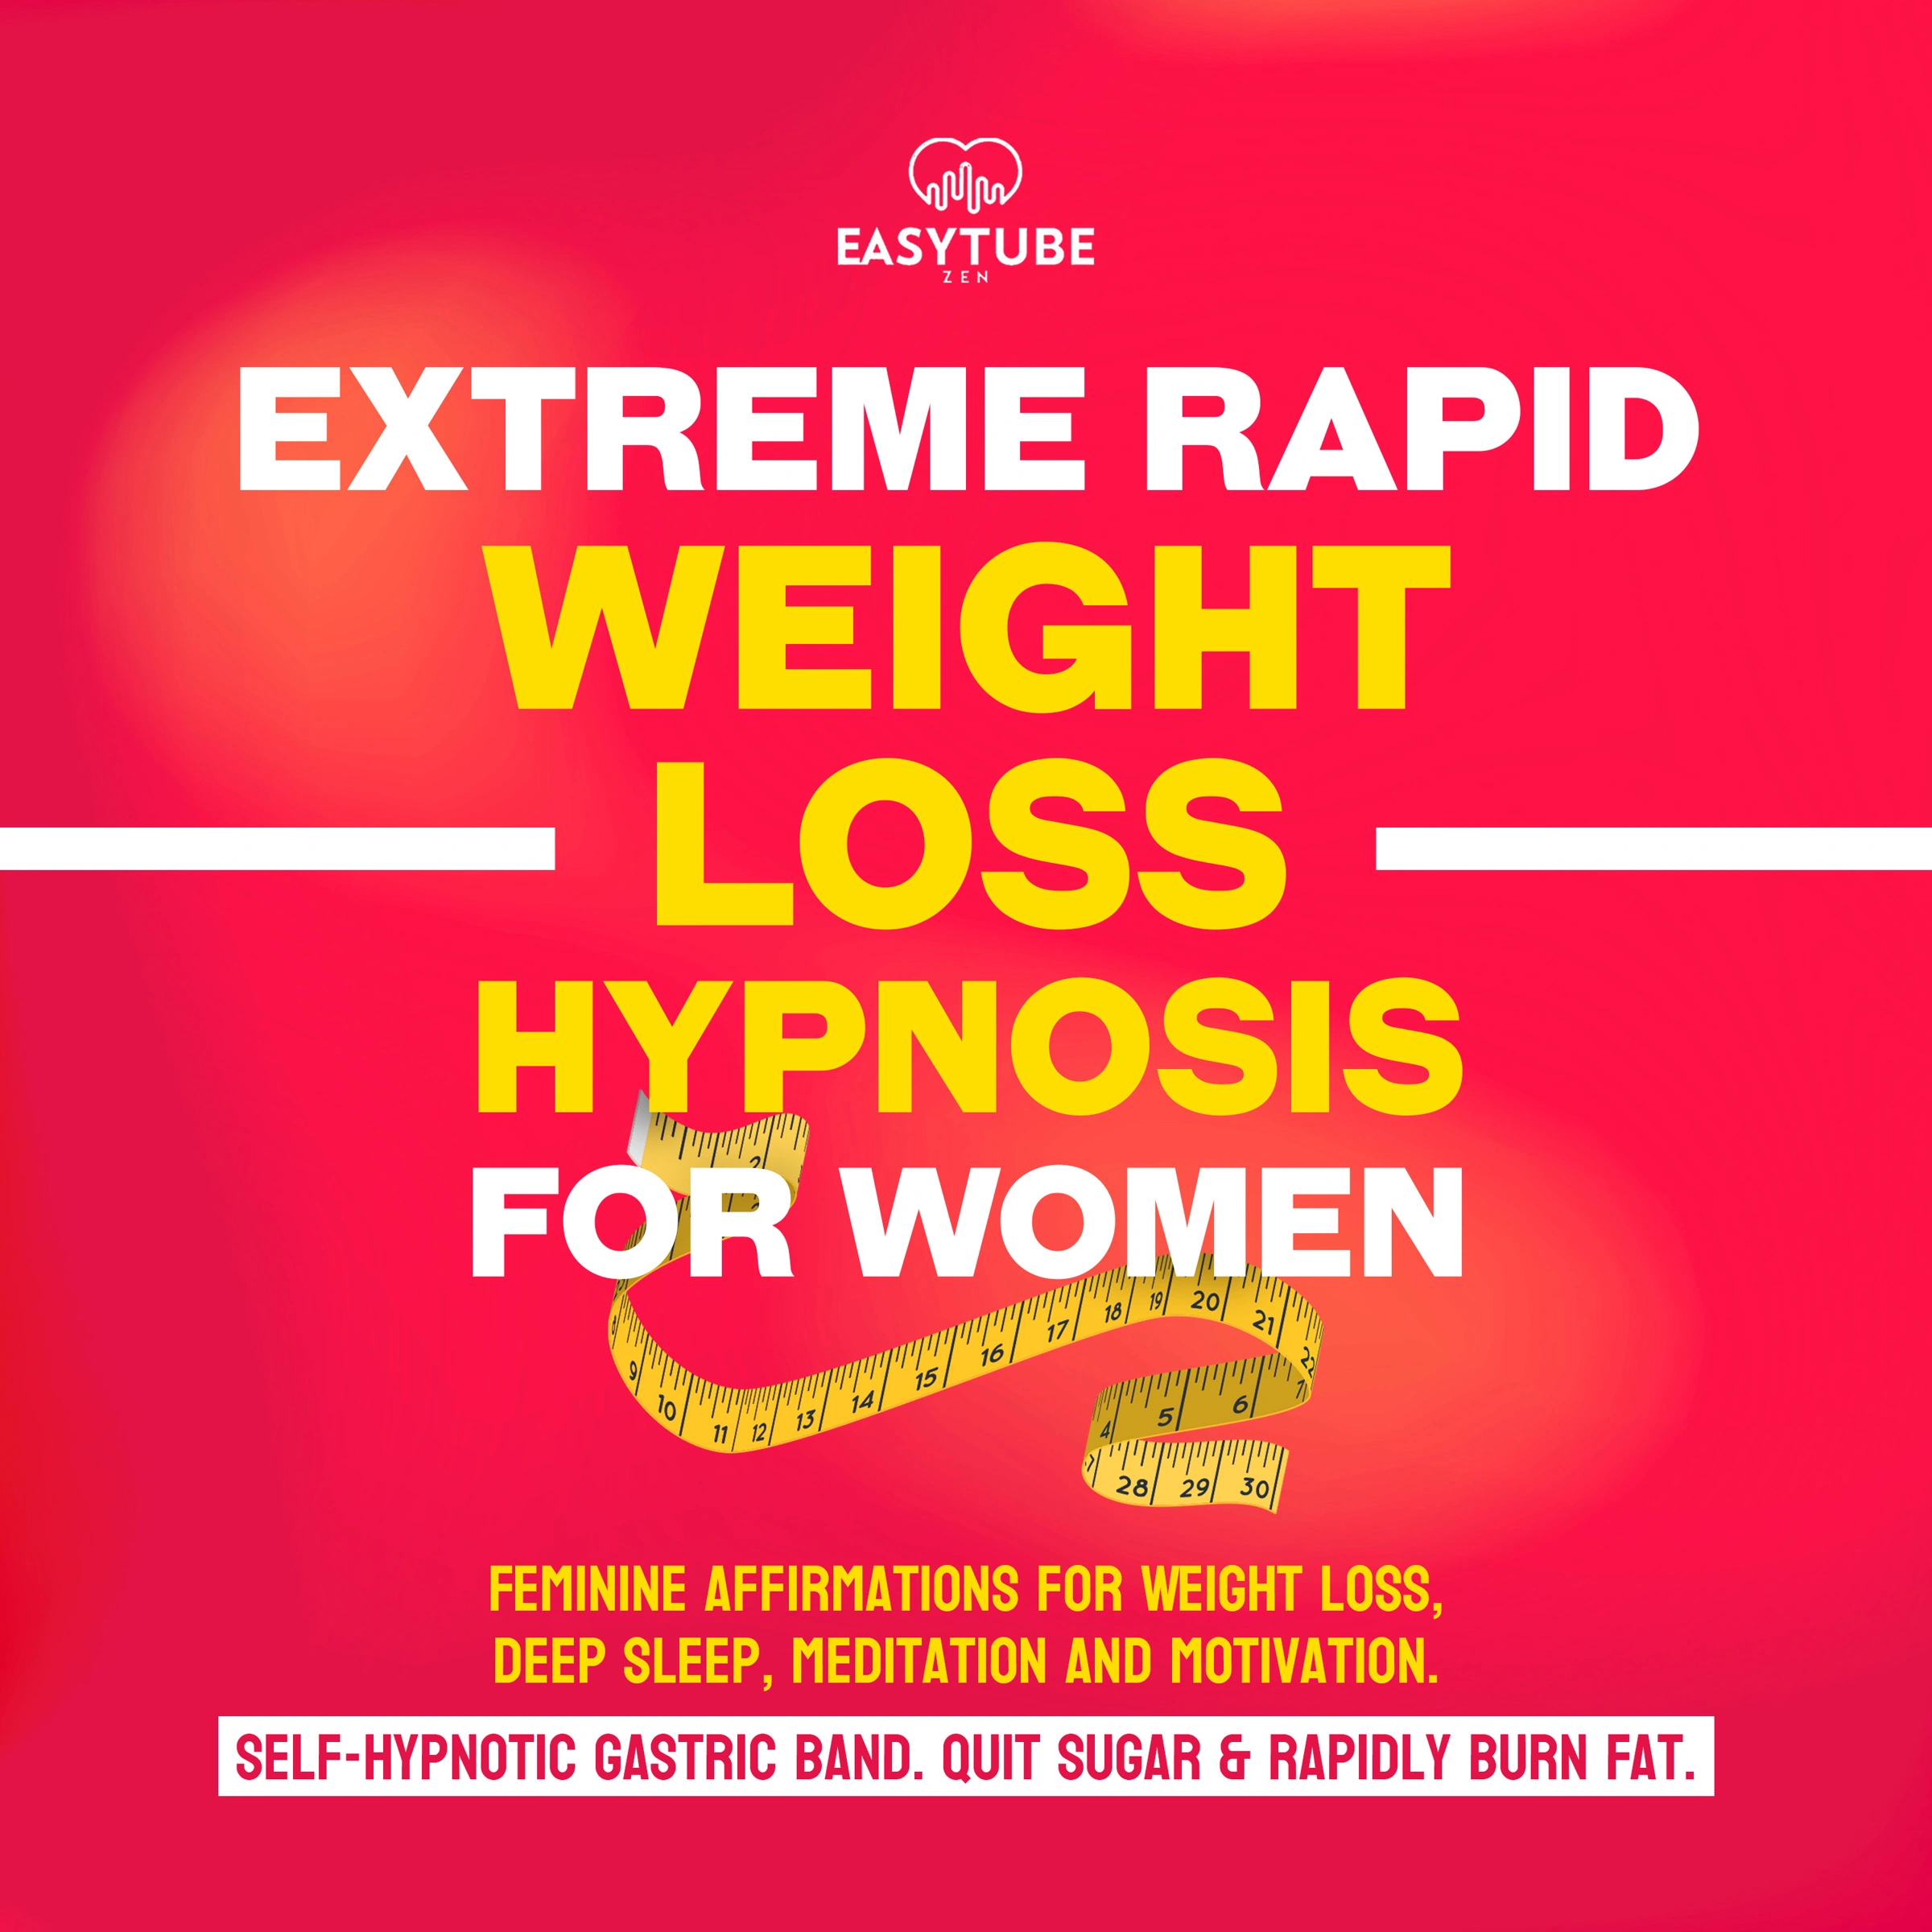 Extreme Rapid Weight Loss Hypnosis for Women Audiobook by EasyTube Zen Studio